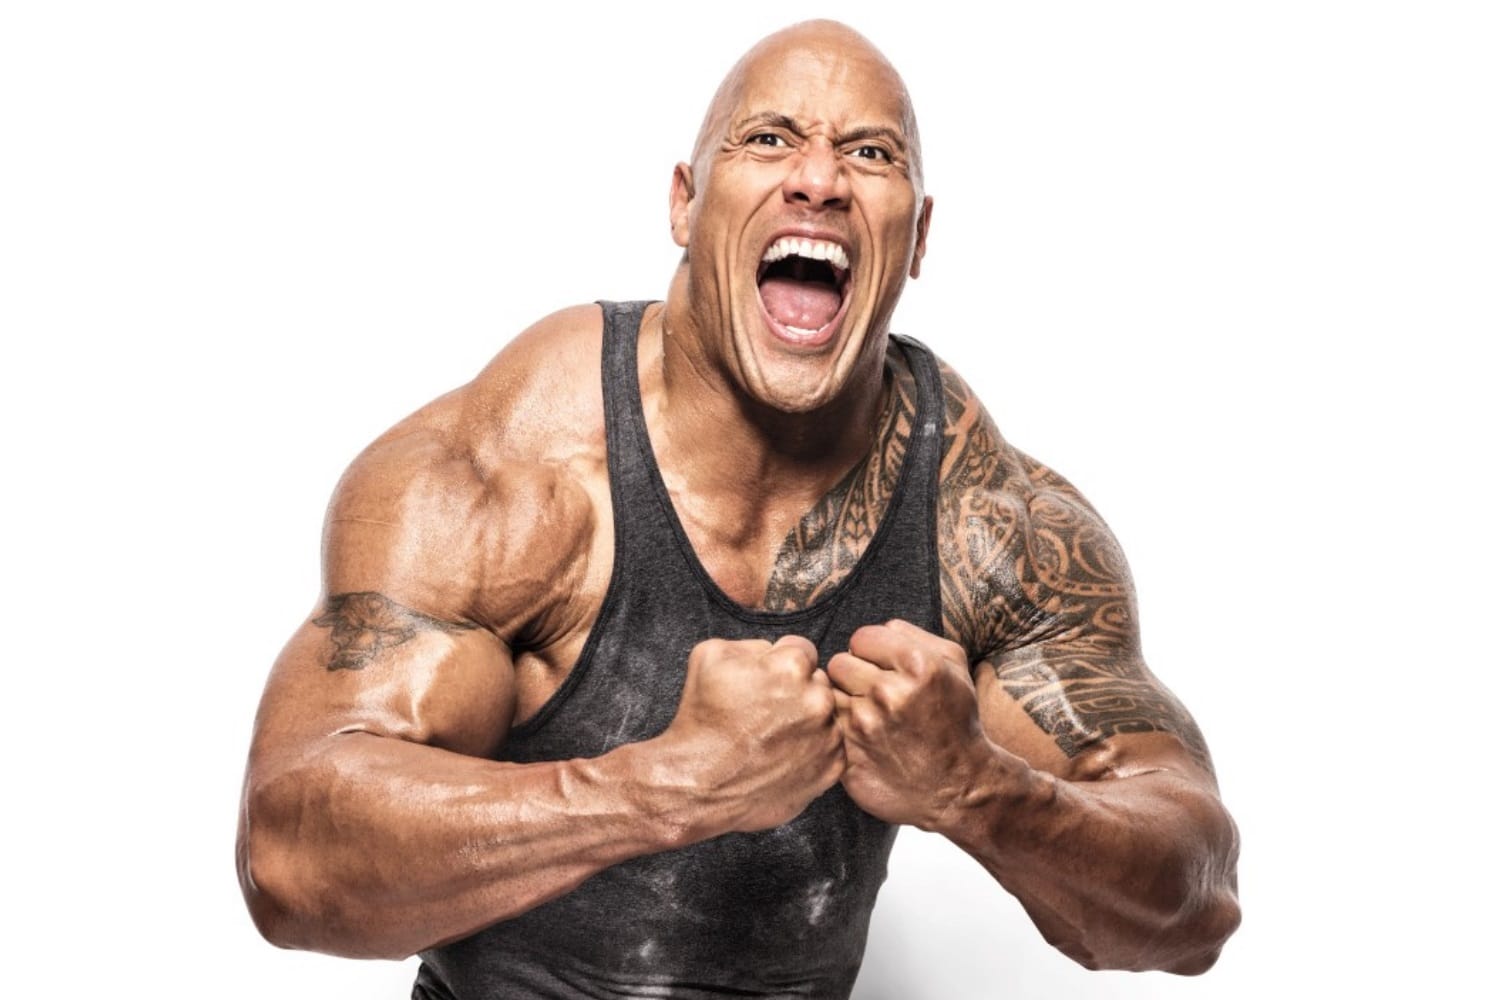 Dwayne "The Rock" Johnson Launches His Own Tequila.